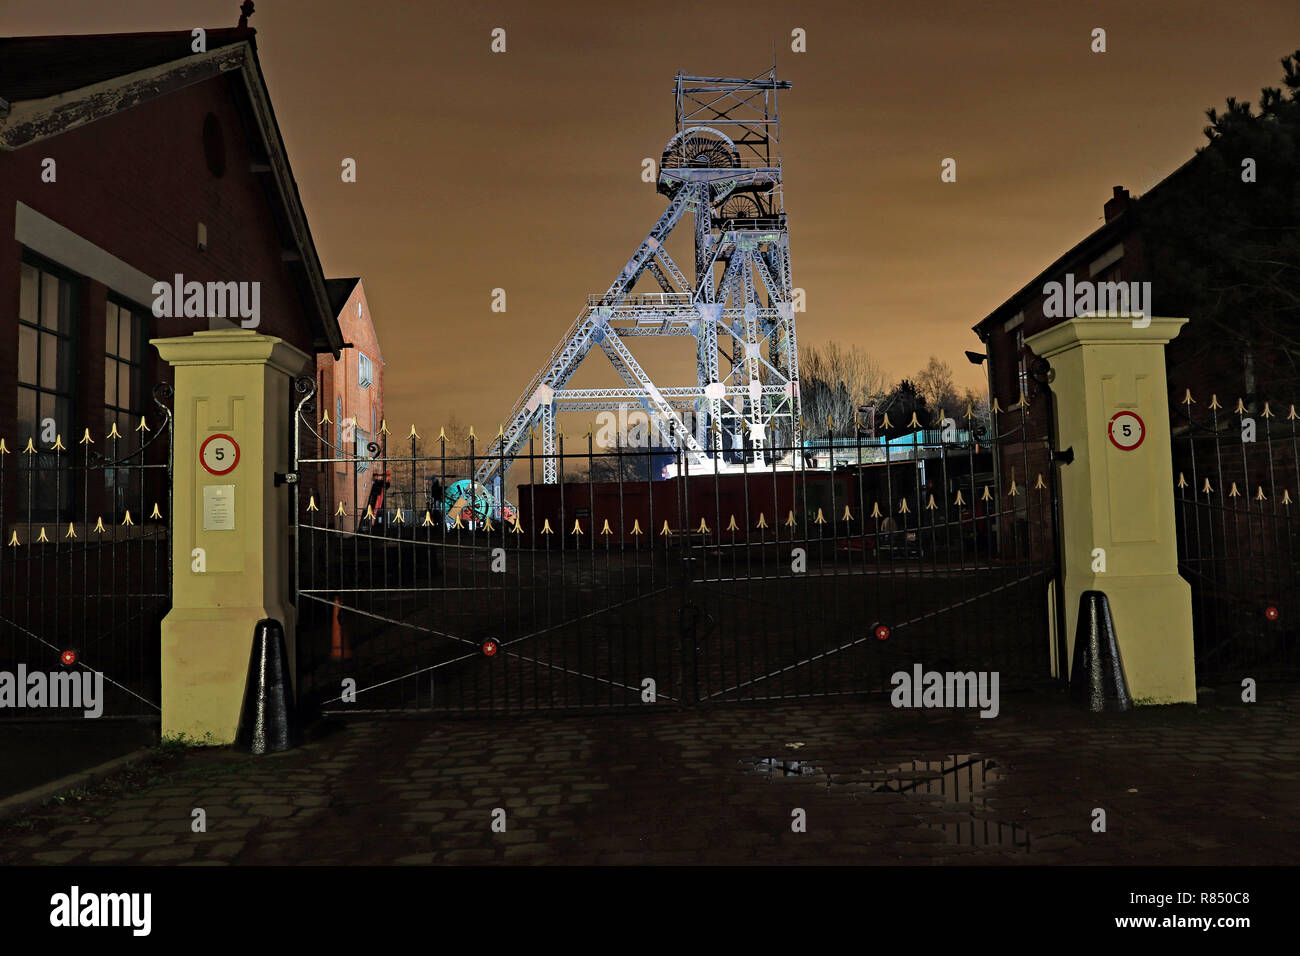 Lit pit head gear and entrance gate to Astley colliery 11.12.18  The pit head gear at the Astley Mining museum lit up for a few weeks over Christmas Stock Photo